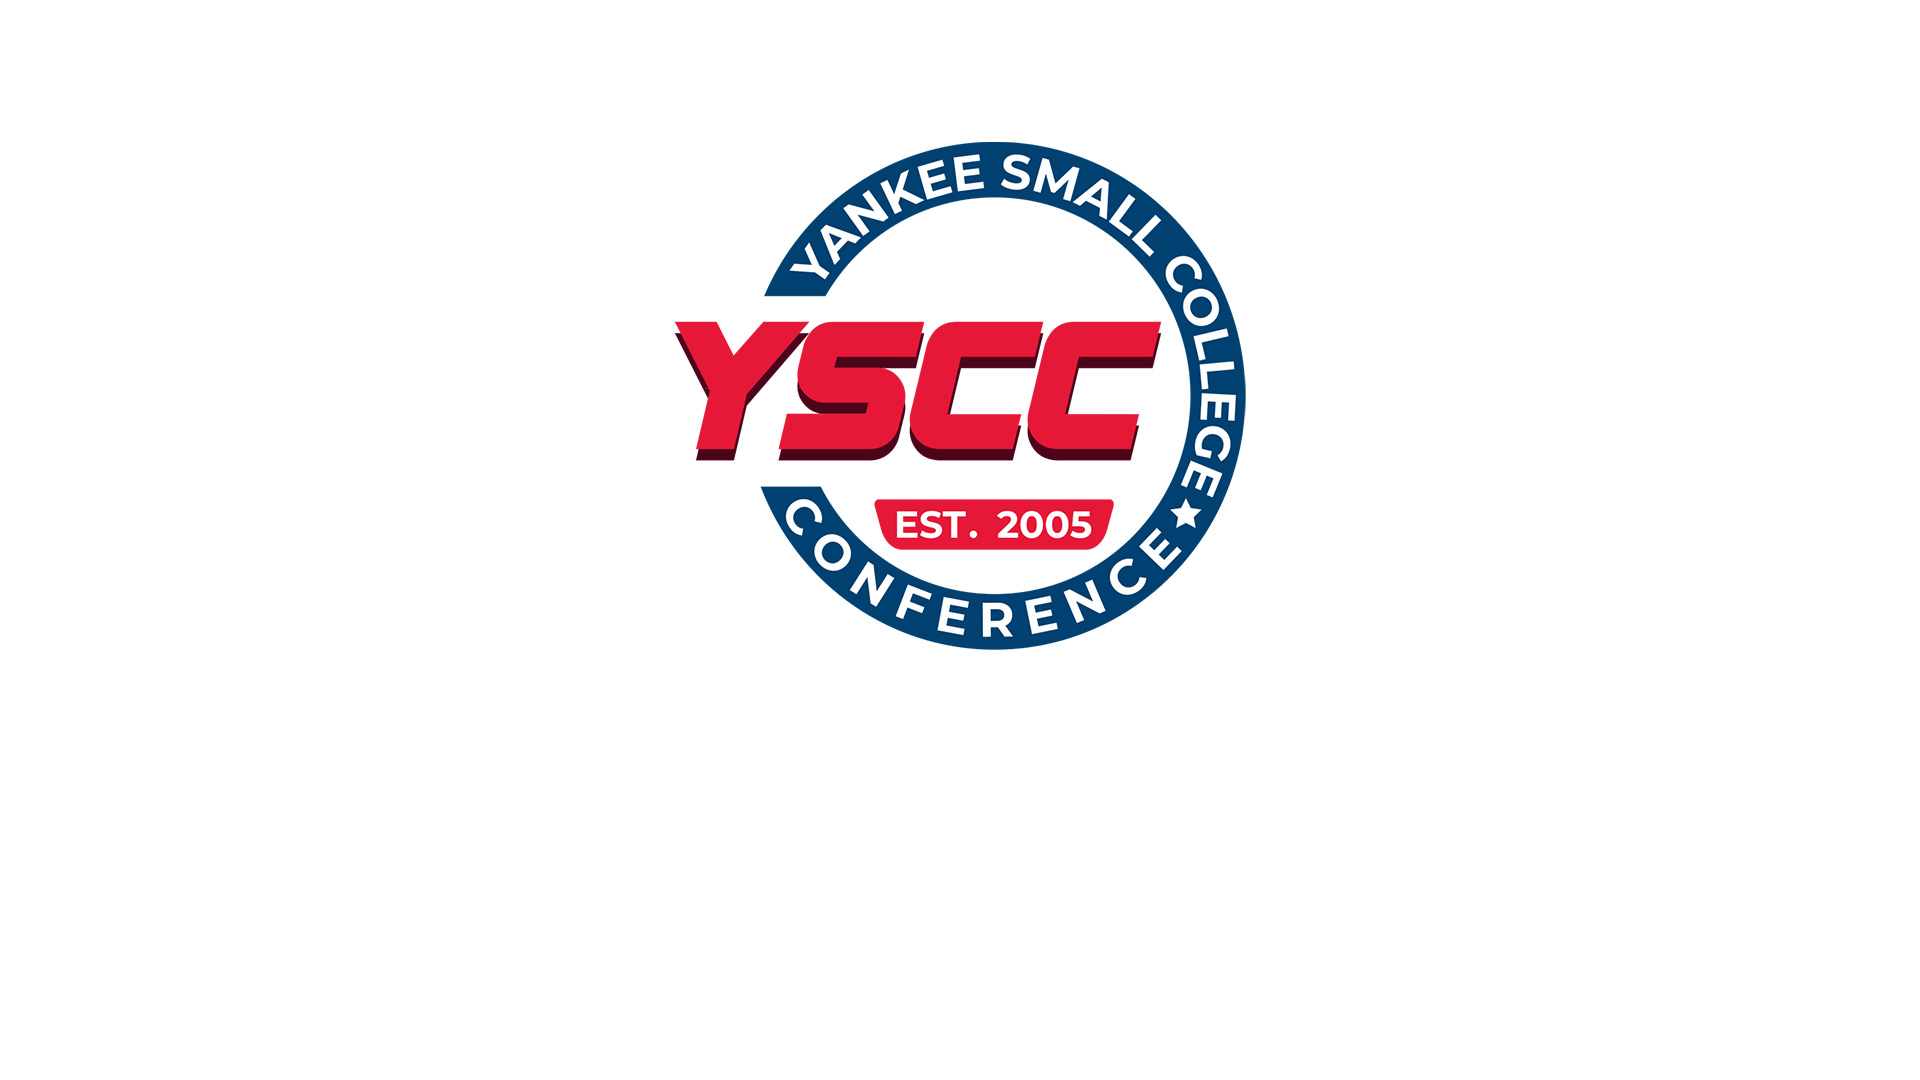 NHTI, College of St Joseph's to face off in YSCC Men’s Soccer Championship